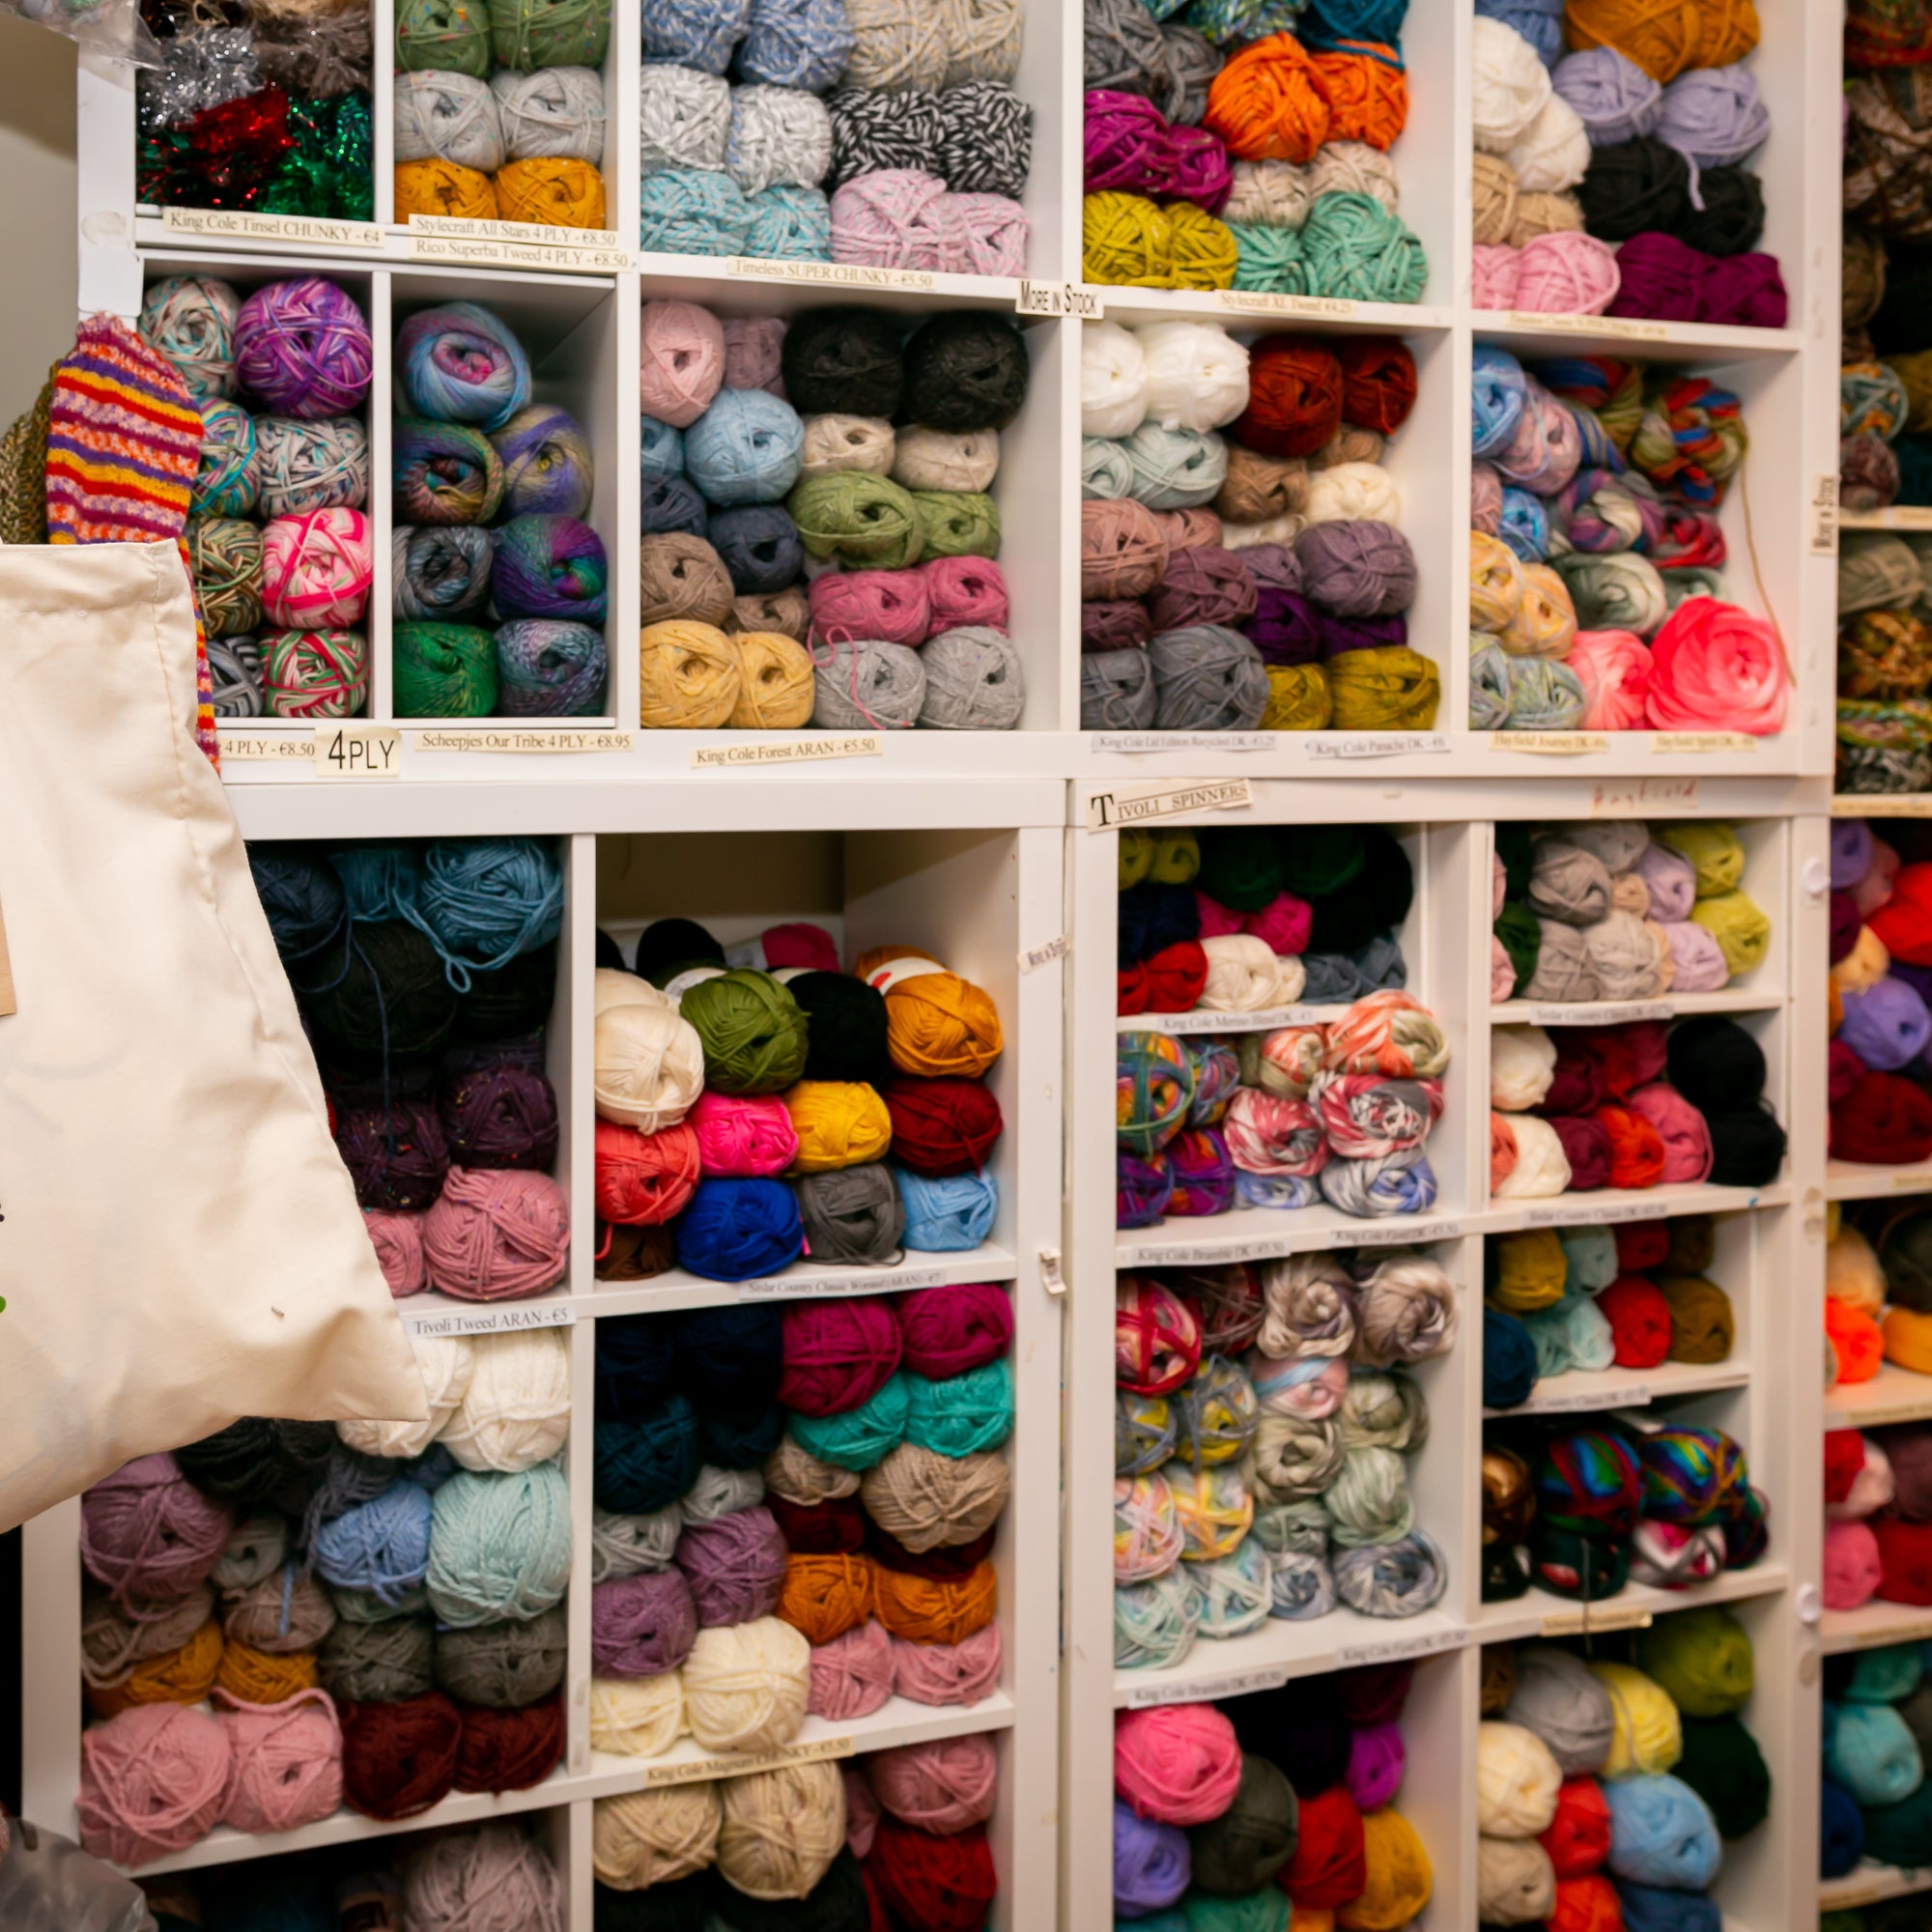 Shop from a wide range of yarns to suit all your knit and crochet makes